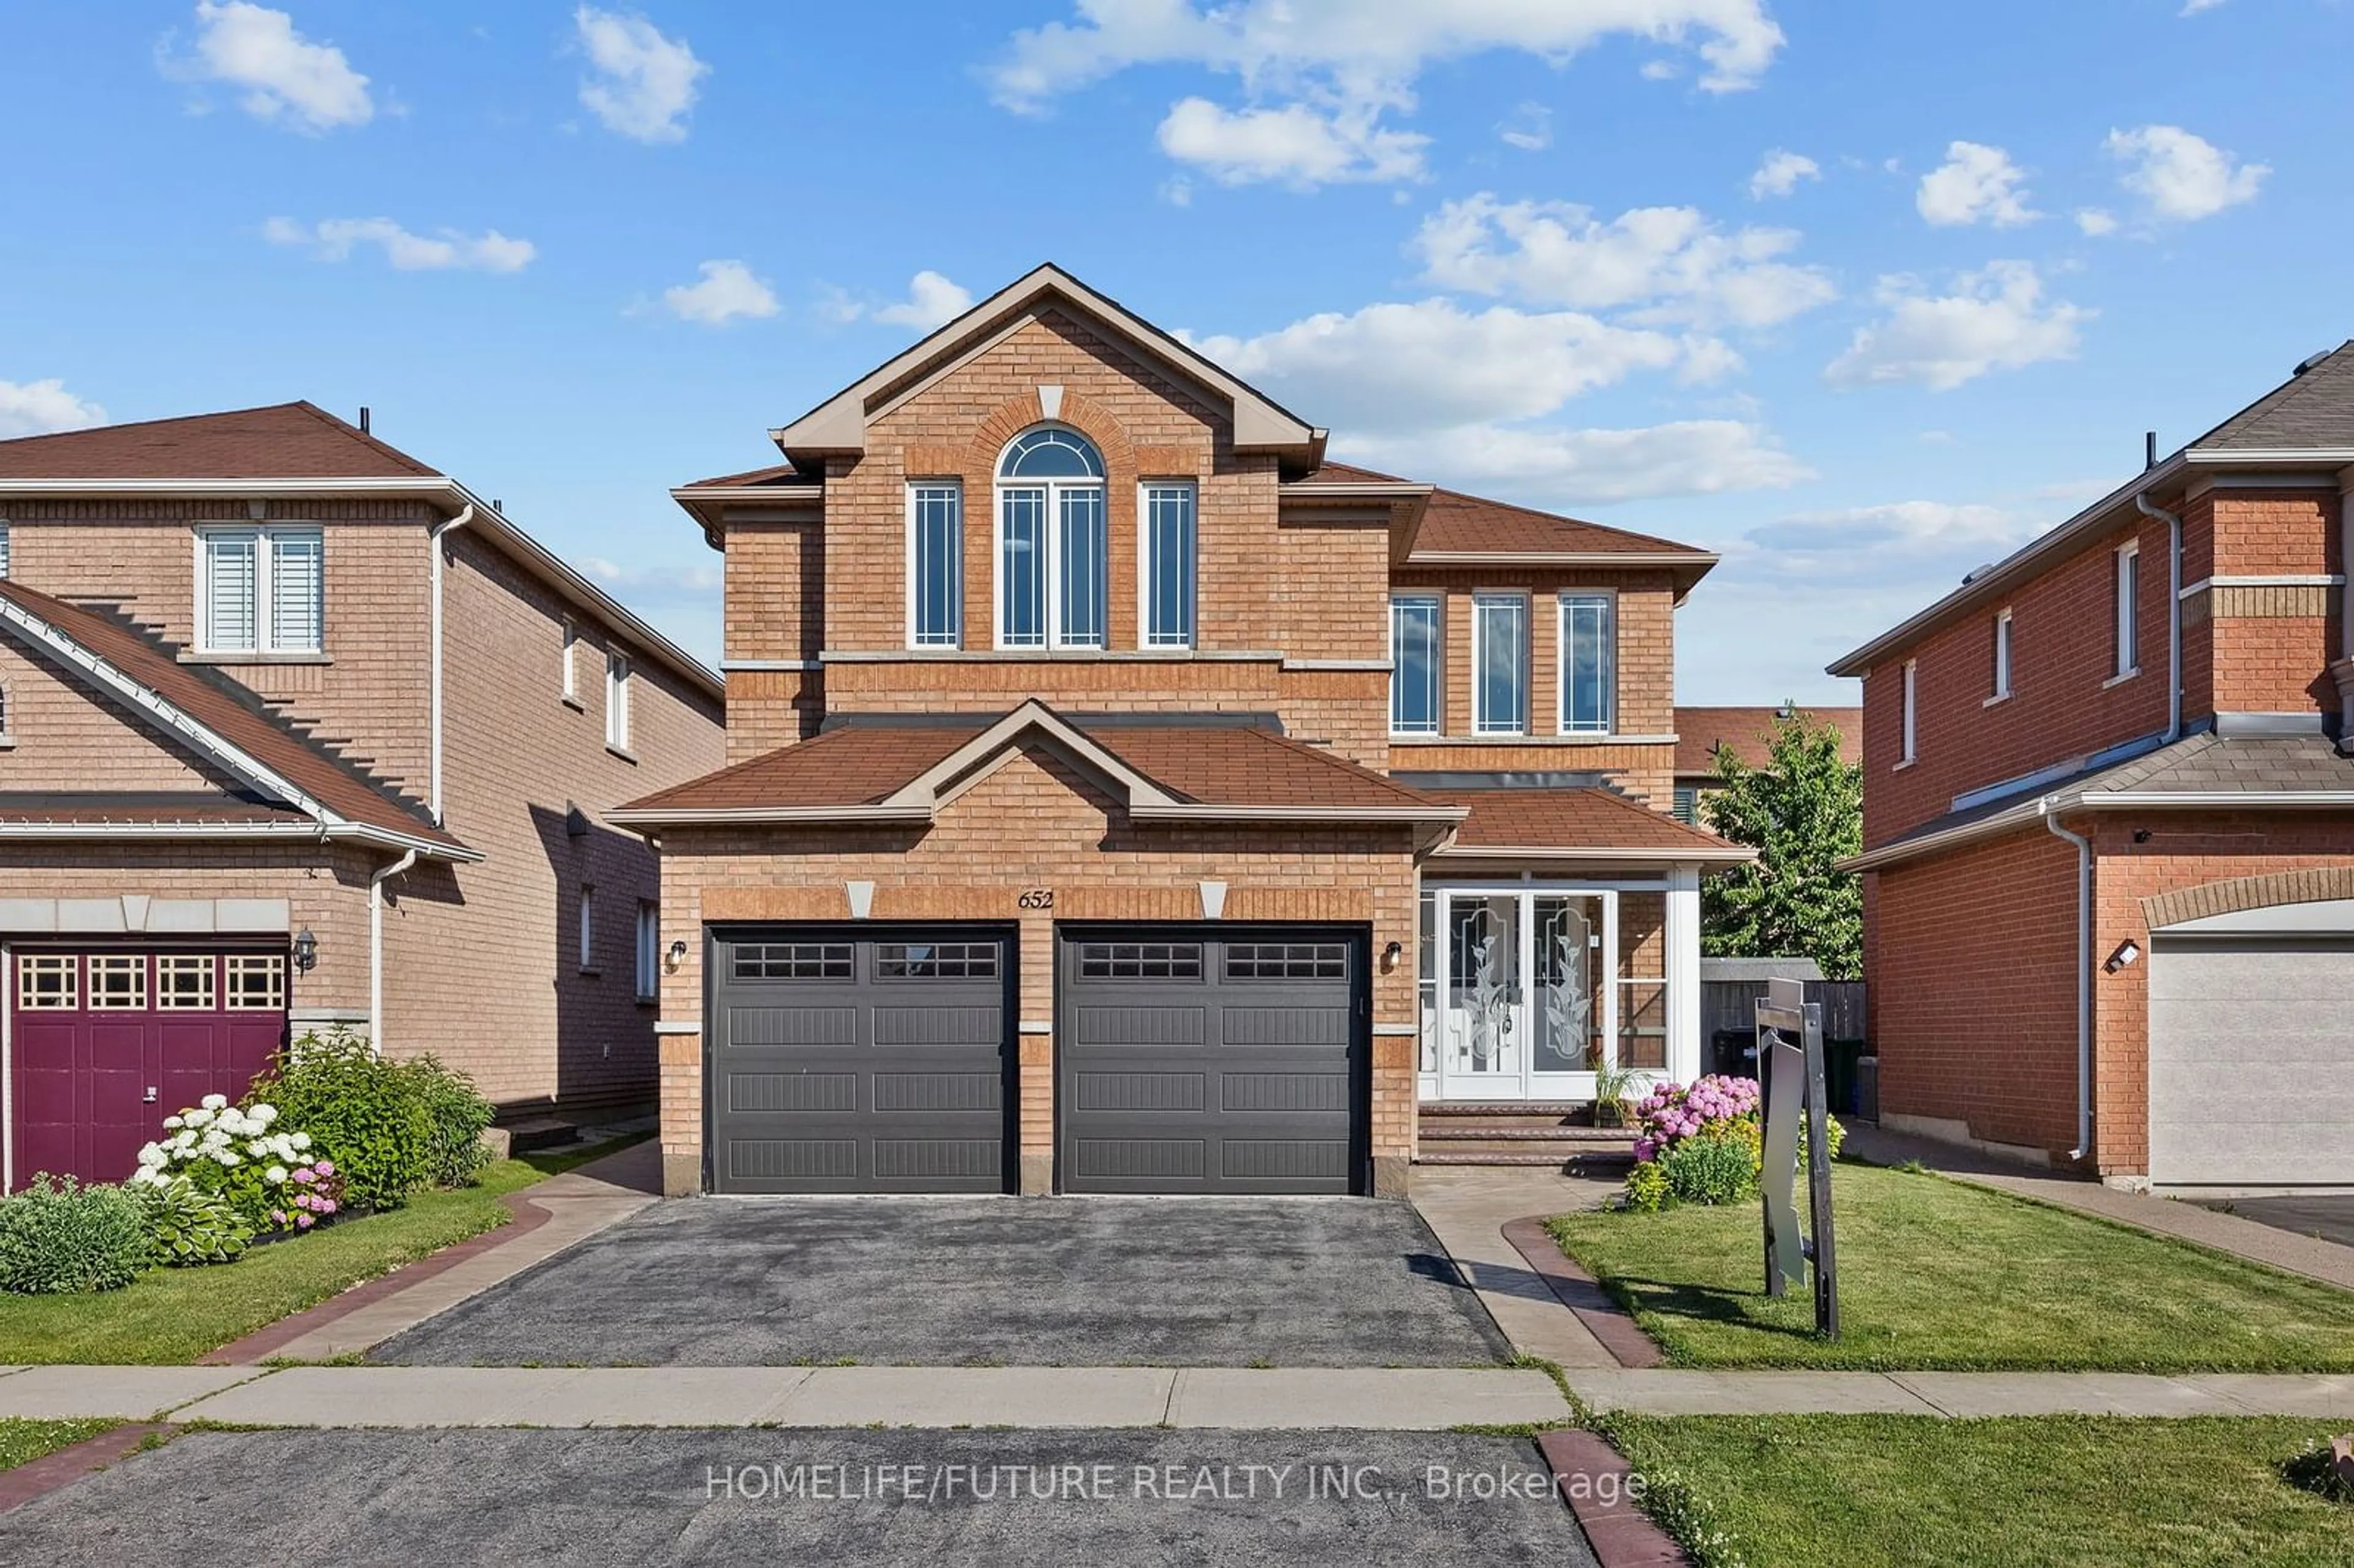 Home with brick exterior material for 652 Twain Ave, Mississauga Ontario L5W 0A3